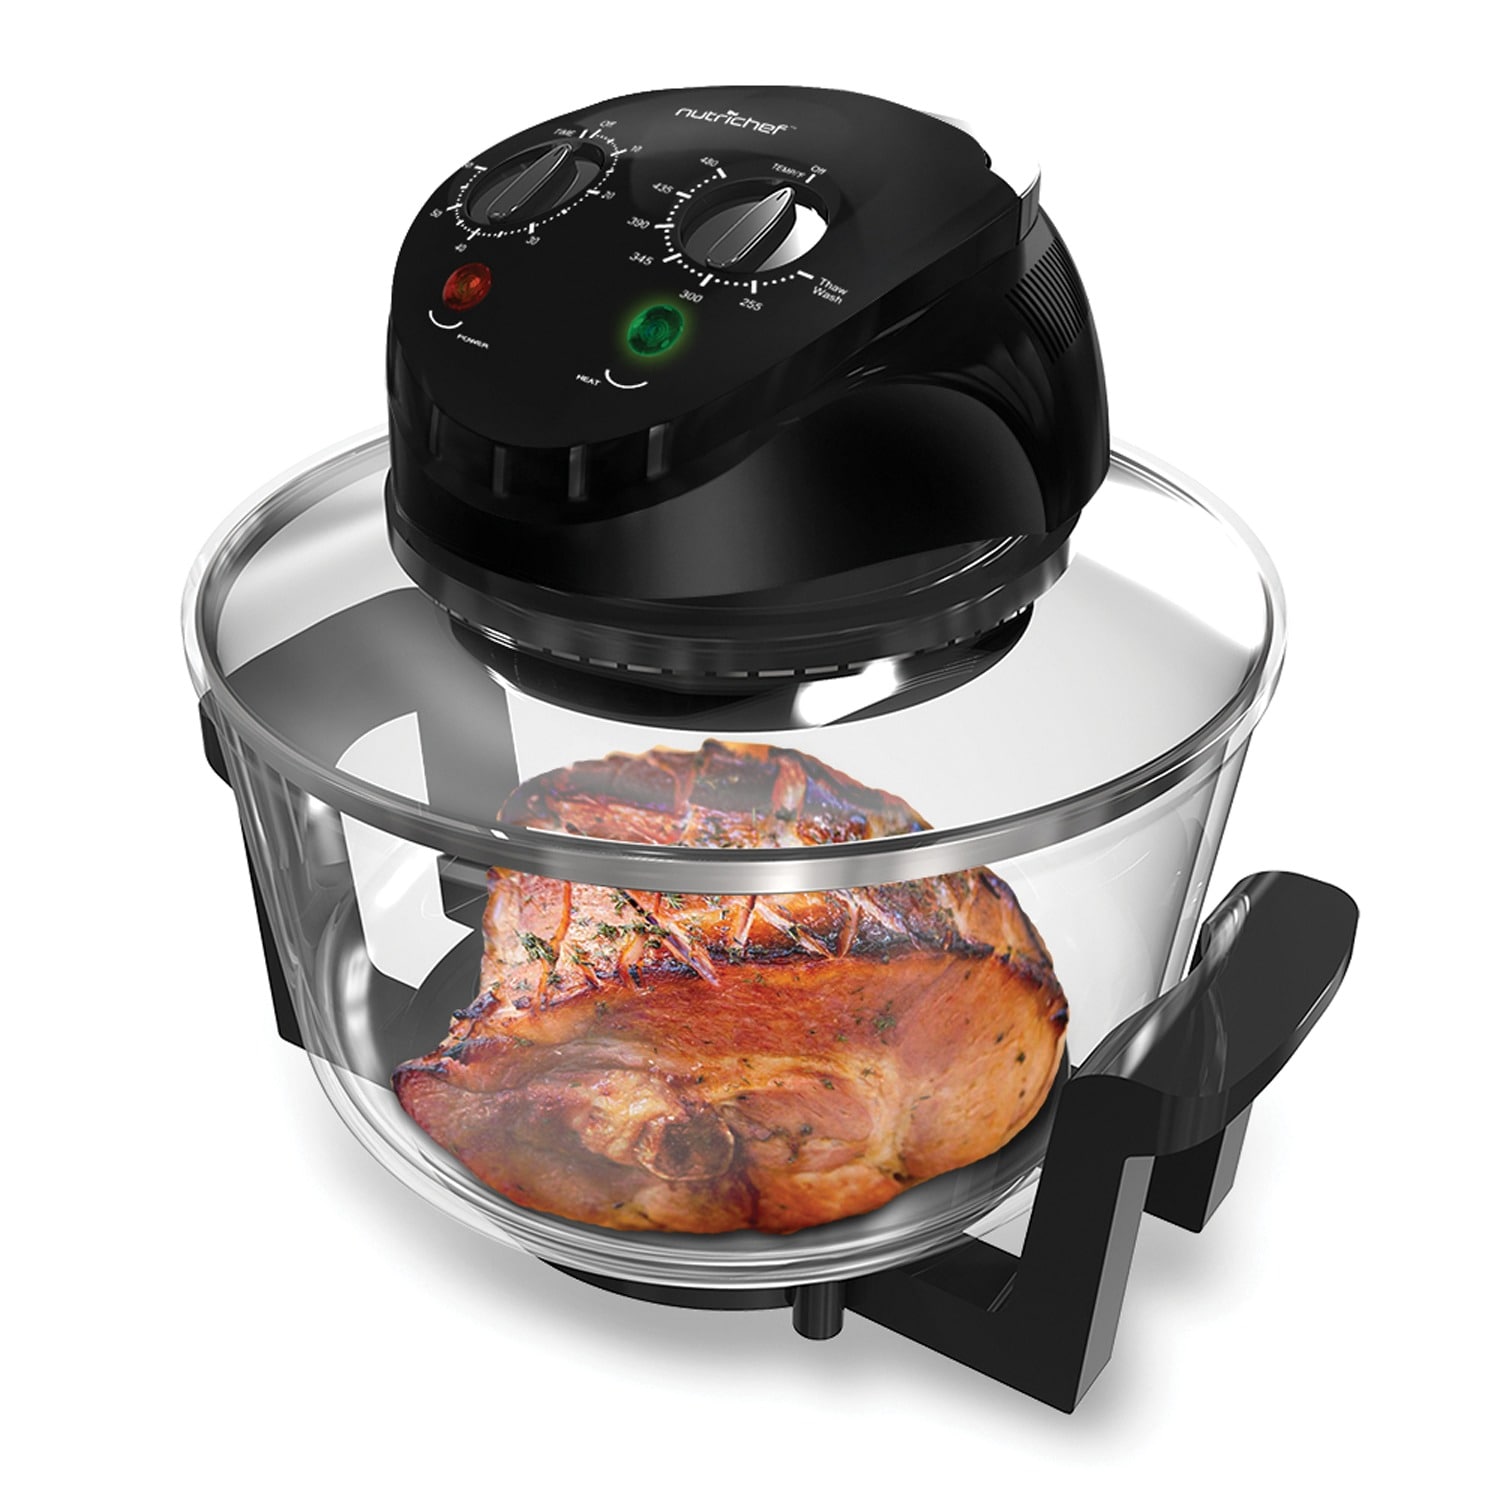 Nutrichef Convection Oven Cooker Air Fryer With Removable Basket Blacksilver Easy Access 